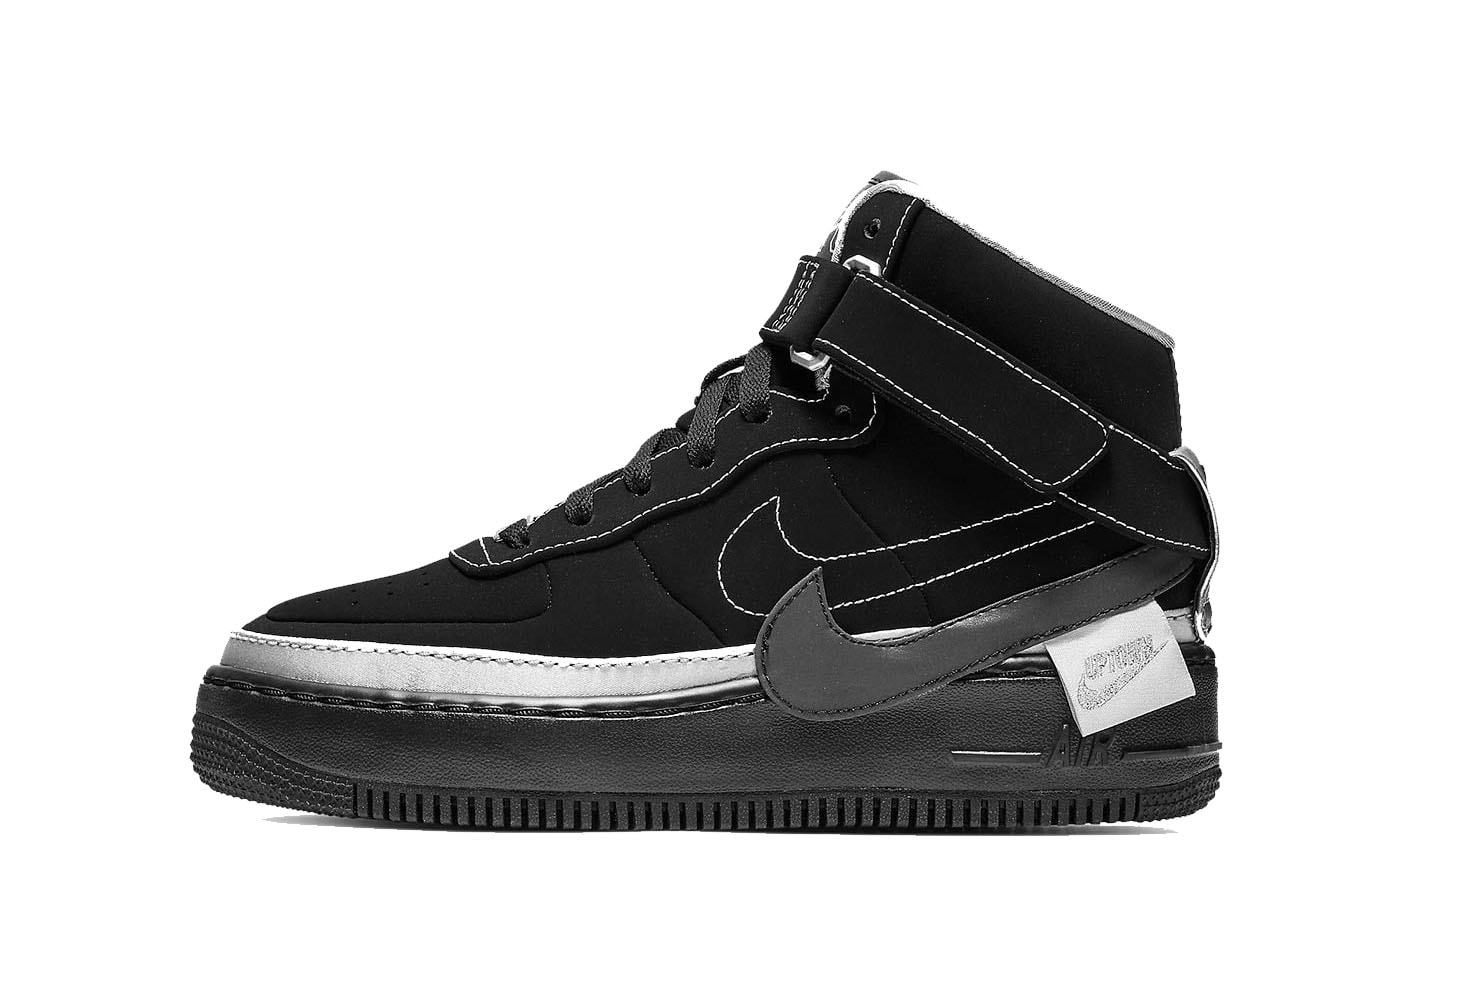 Nike Air Force 1 Jester XX "Rox Brown" Sneaker Collaboration Shoe Black New York City Inspired 